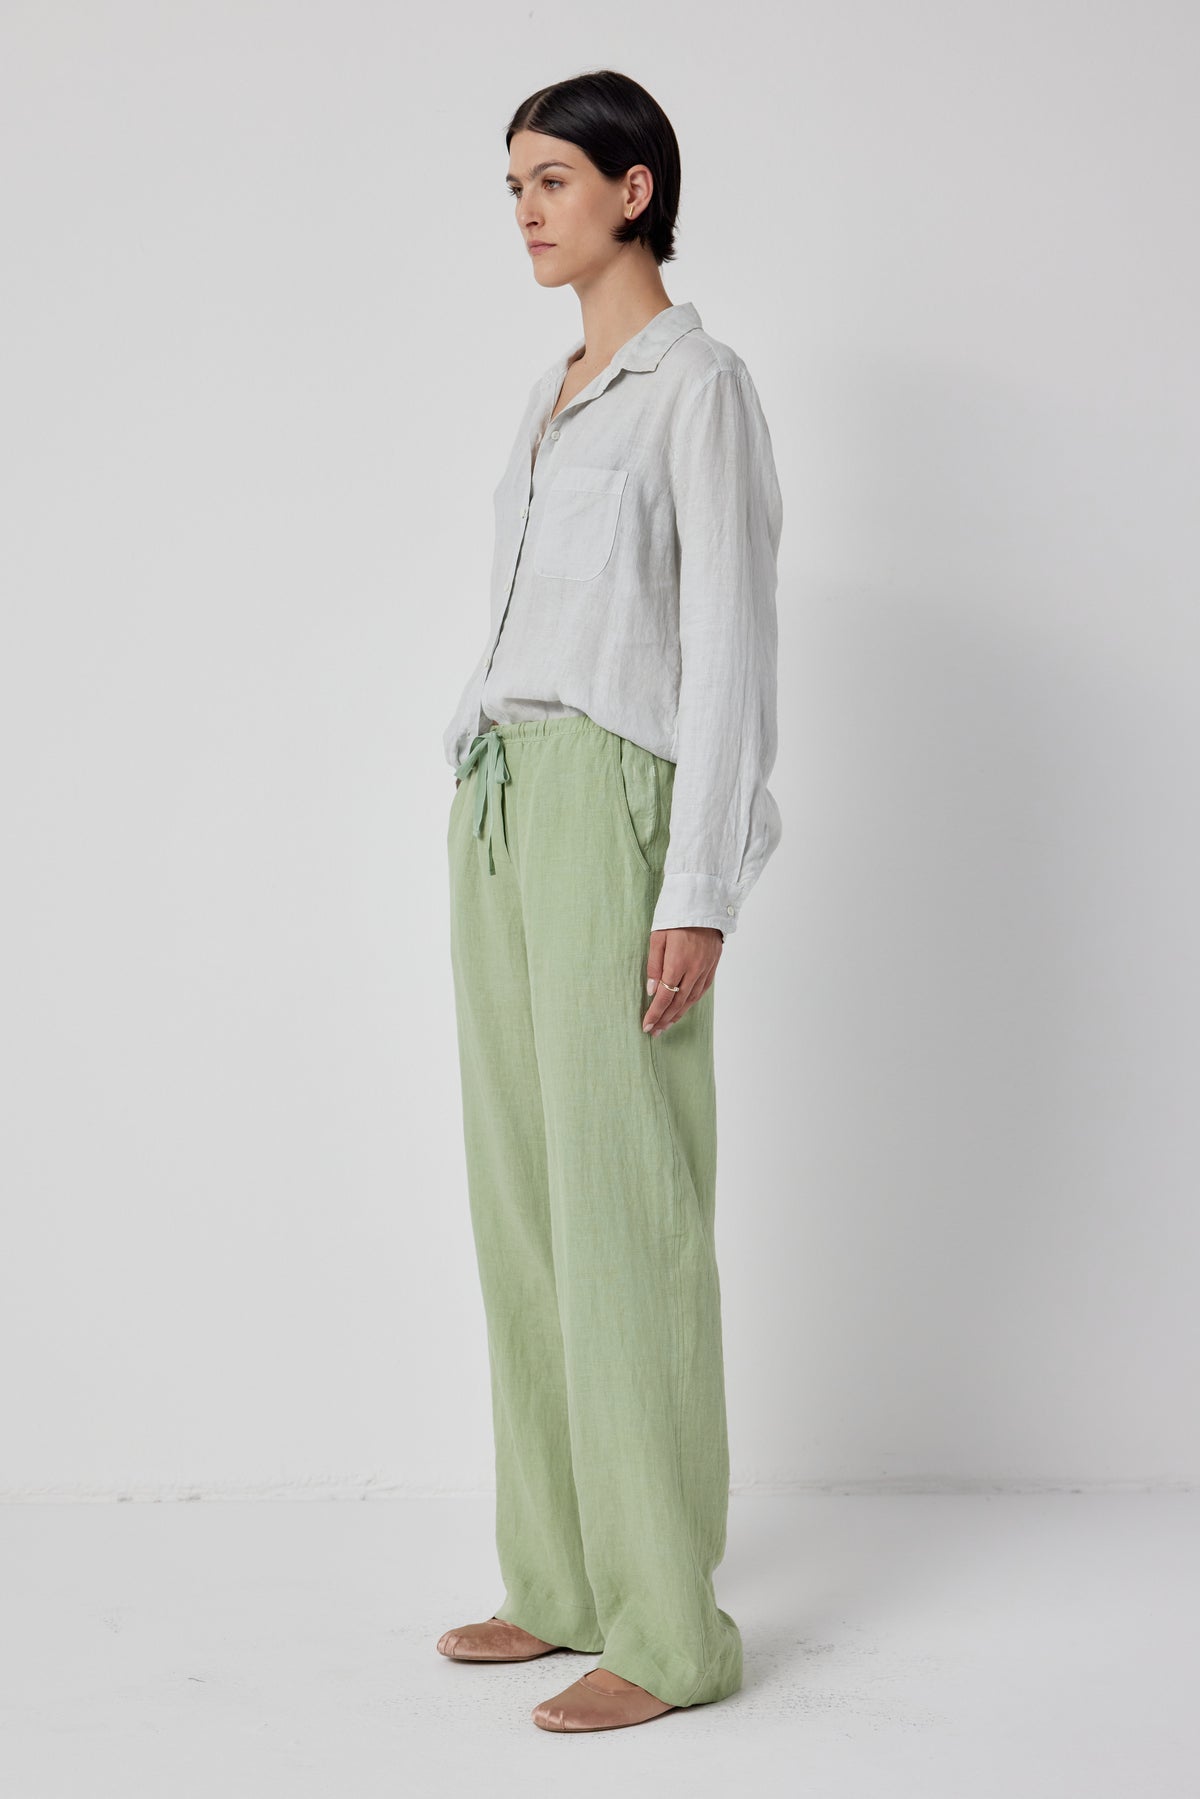 Woman standing in a studio, wearing a casual white shirt and light green Velvet by Jenny Graham Pico Linen Pant with an elastic waist, looking to the side, with a neutral expression.-36219023098049